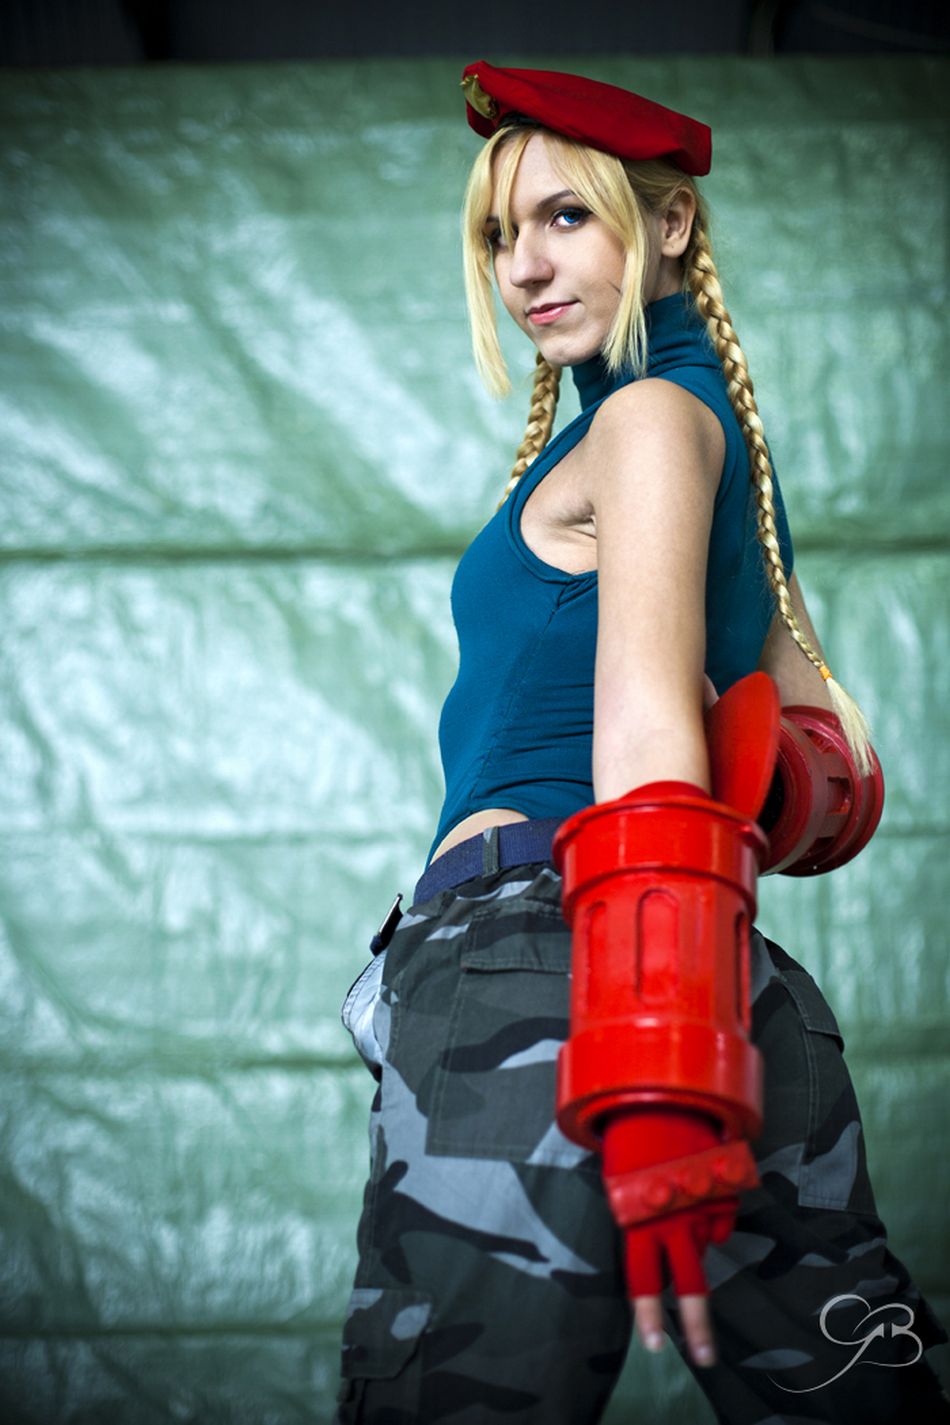 cammy cosplay images